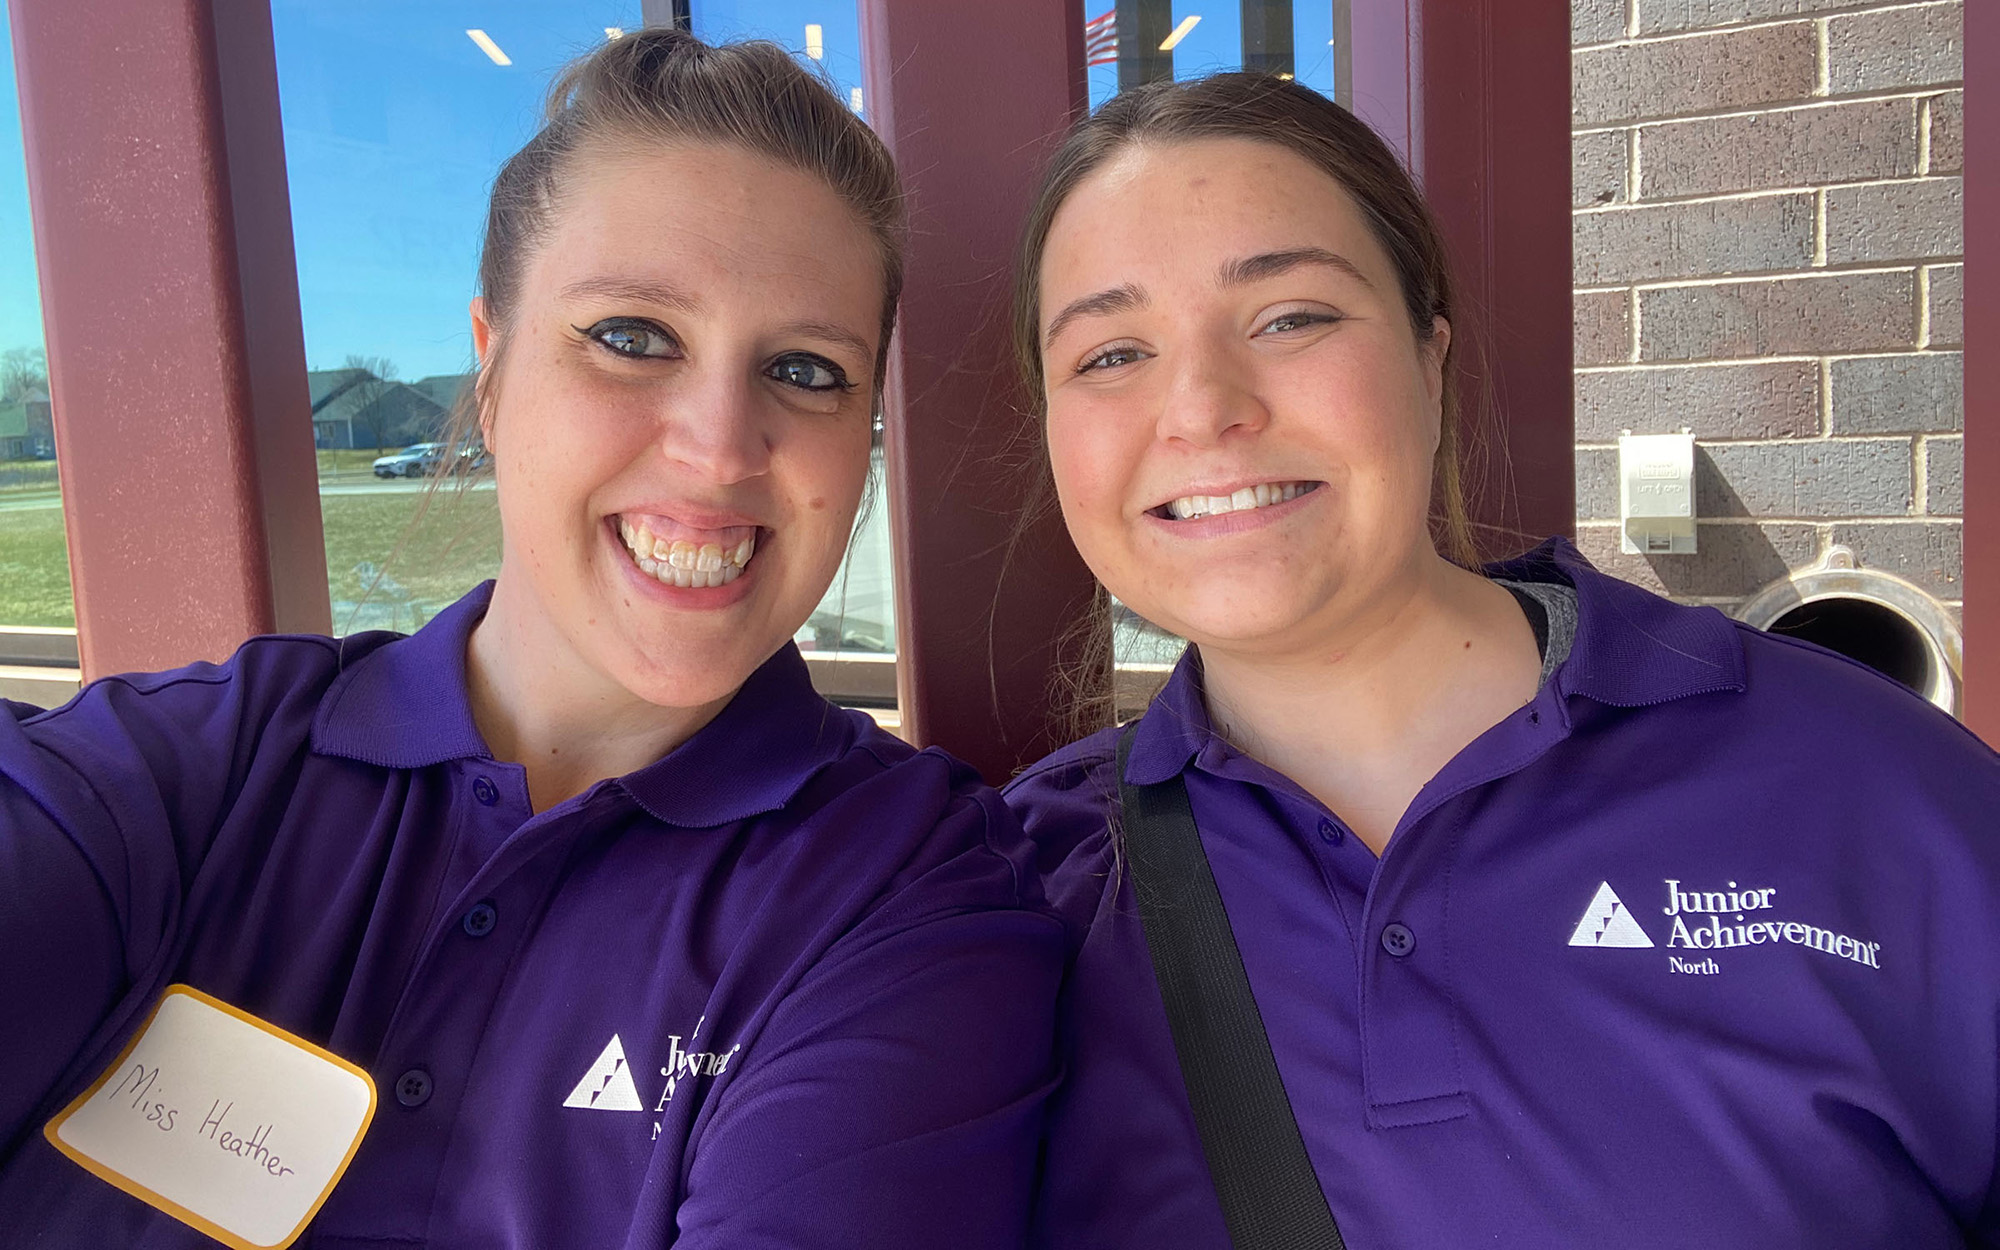 Two Affinity Plus employees smiling in purple shirts